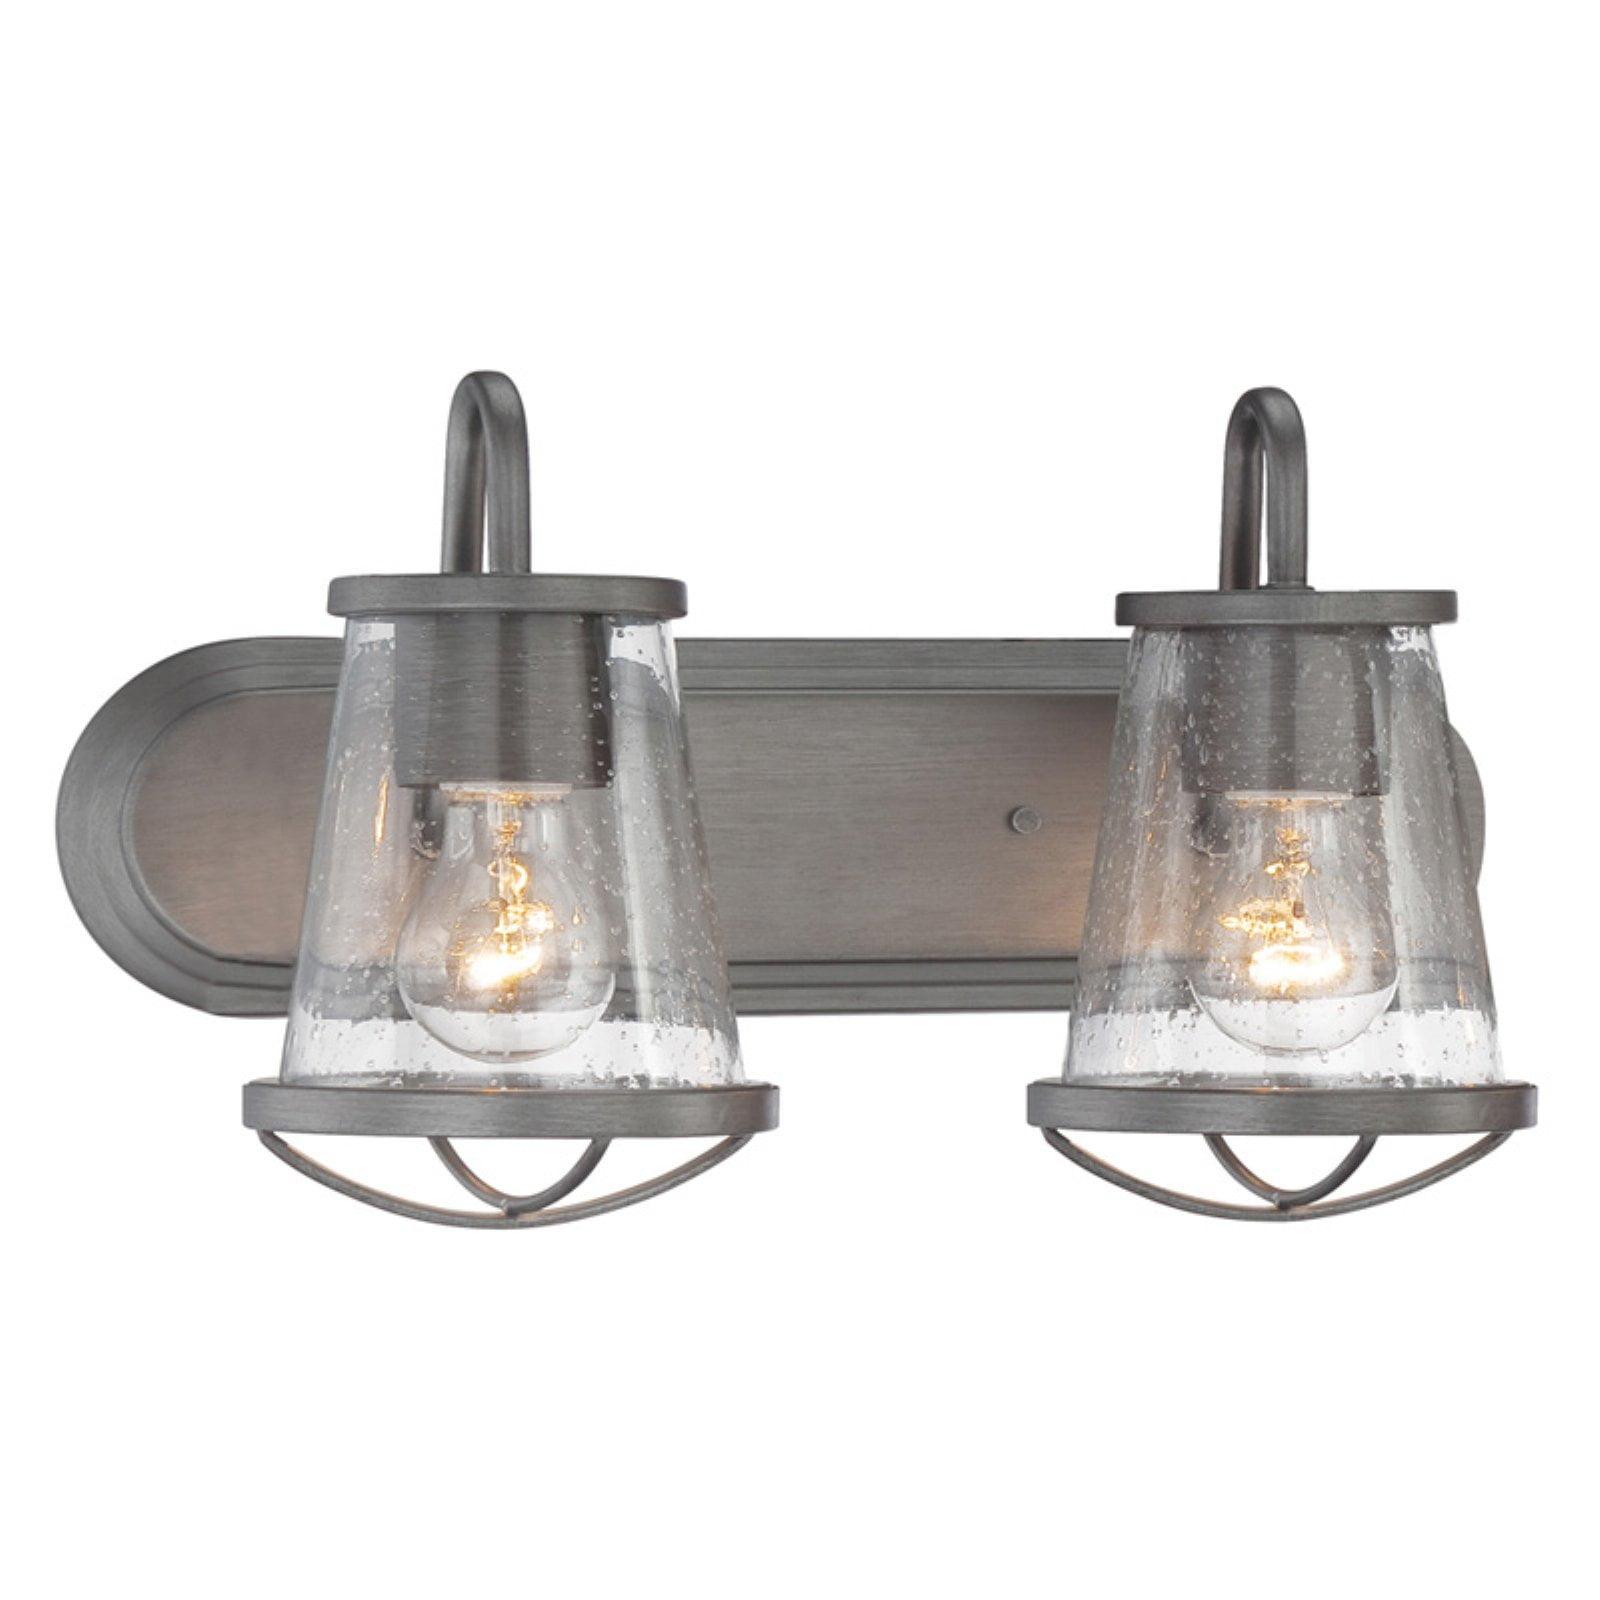 Darby Industrial 2-Light Vanity Sconce in Weathered Iron with Seedy Glass